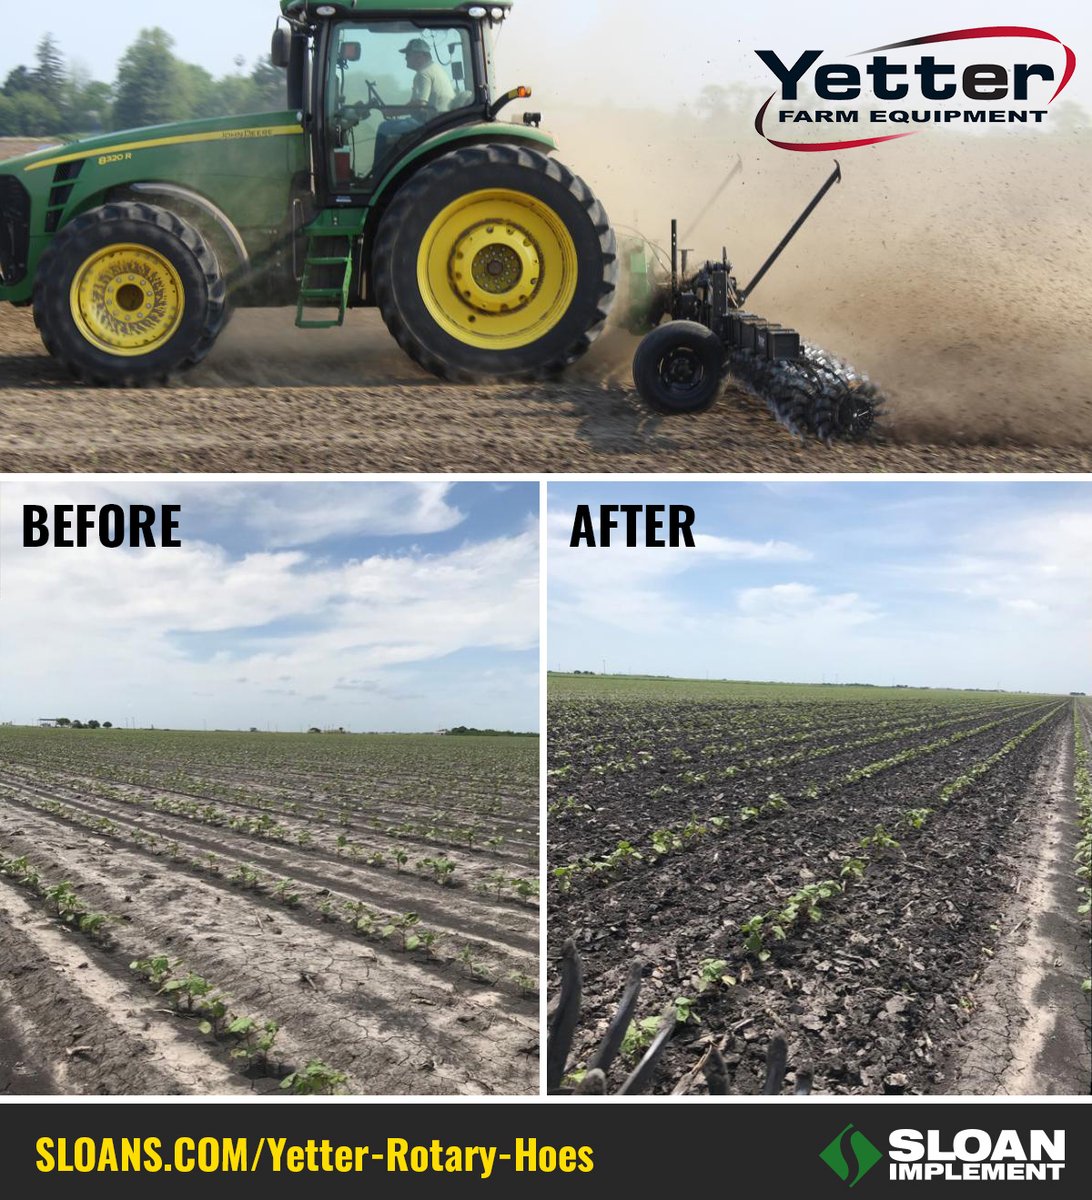 NEW Yetter Rotary Hoes in-stock! Crusts formed after, hard pouring rains prevent your crops from emerging. sloans.com/yetter-rotary-… - #yetter #rotaryhoe #sloans #sloanimplement #johndeere #johndeeredealer #plant24 #farming #agriculture